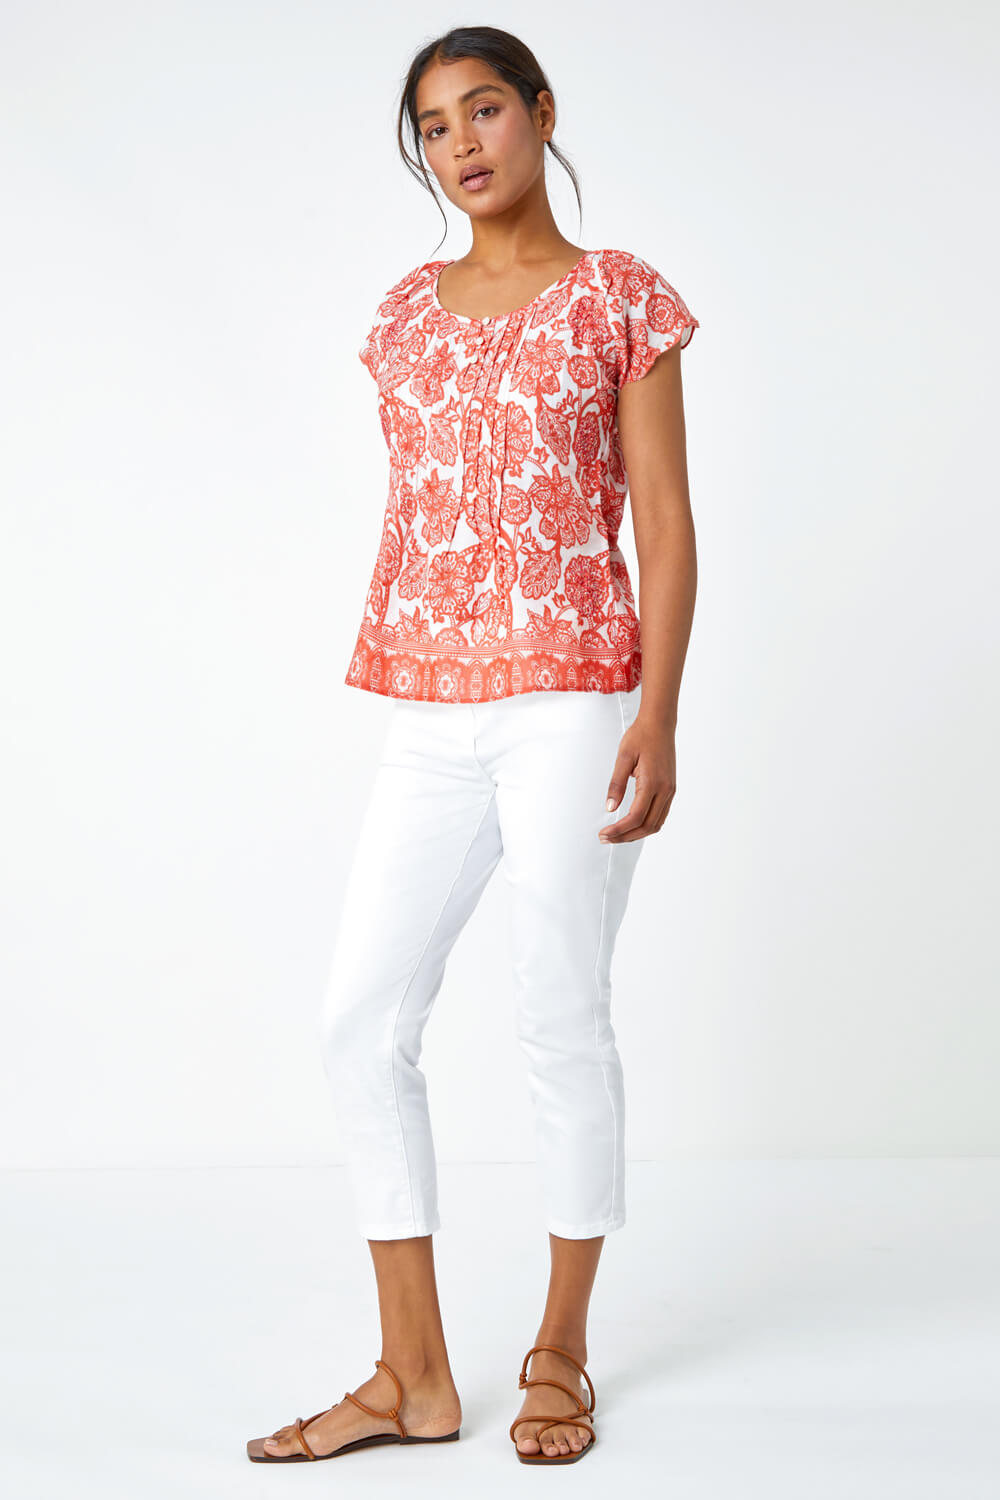 CORAL Floral Print Cotton Top, Image 3 of 5